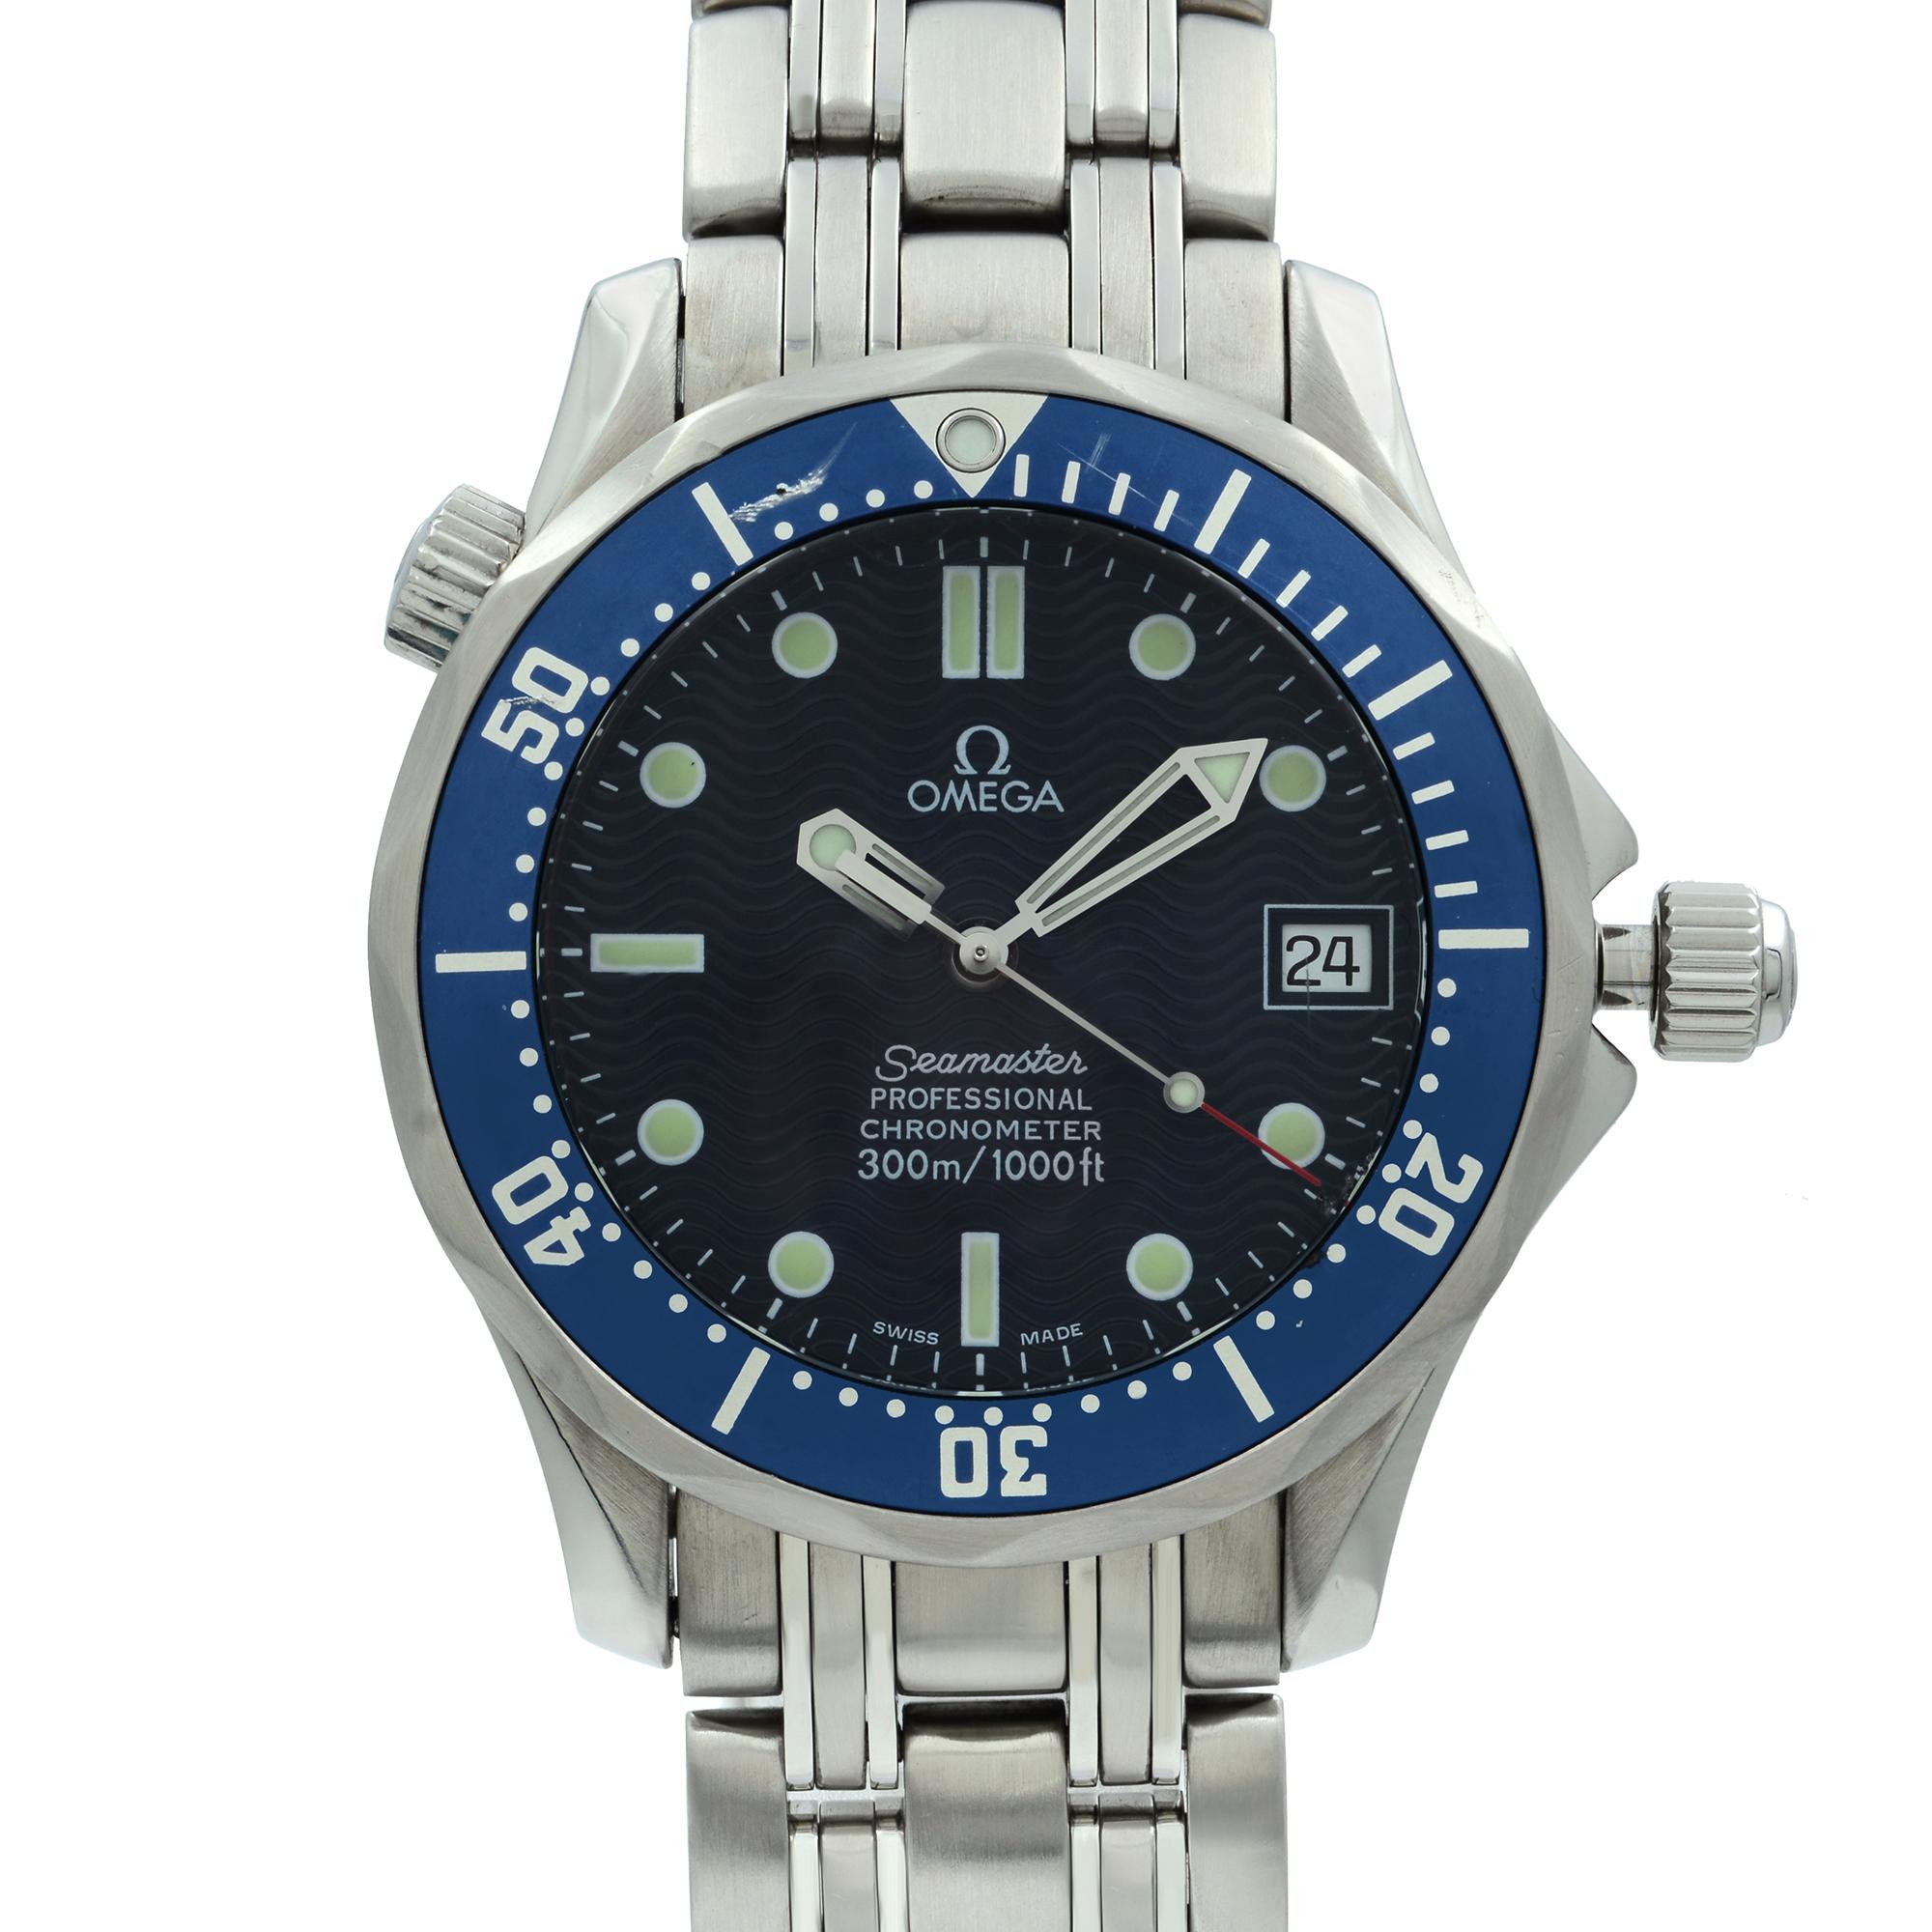 Pre-owned Omega Seamaster 36mm Steel Blue Wave Dial Automatic Midsize Watch. Shows Scratches and Wear Signs on the Bezel and Bracelet as Shown in the Pictures. Original Box and Papers are not included comes with a Chronostore presentation box and